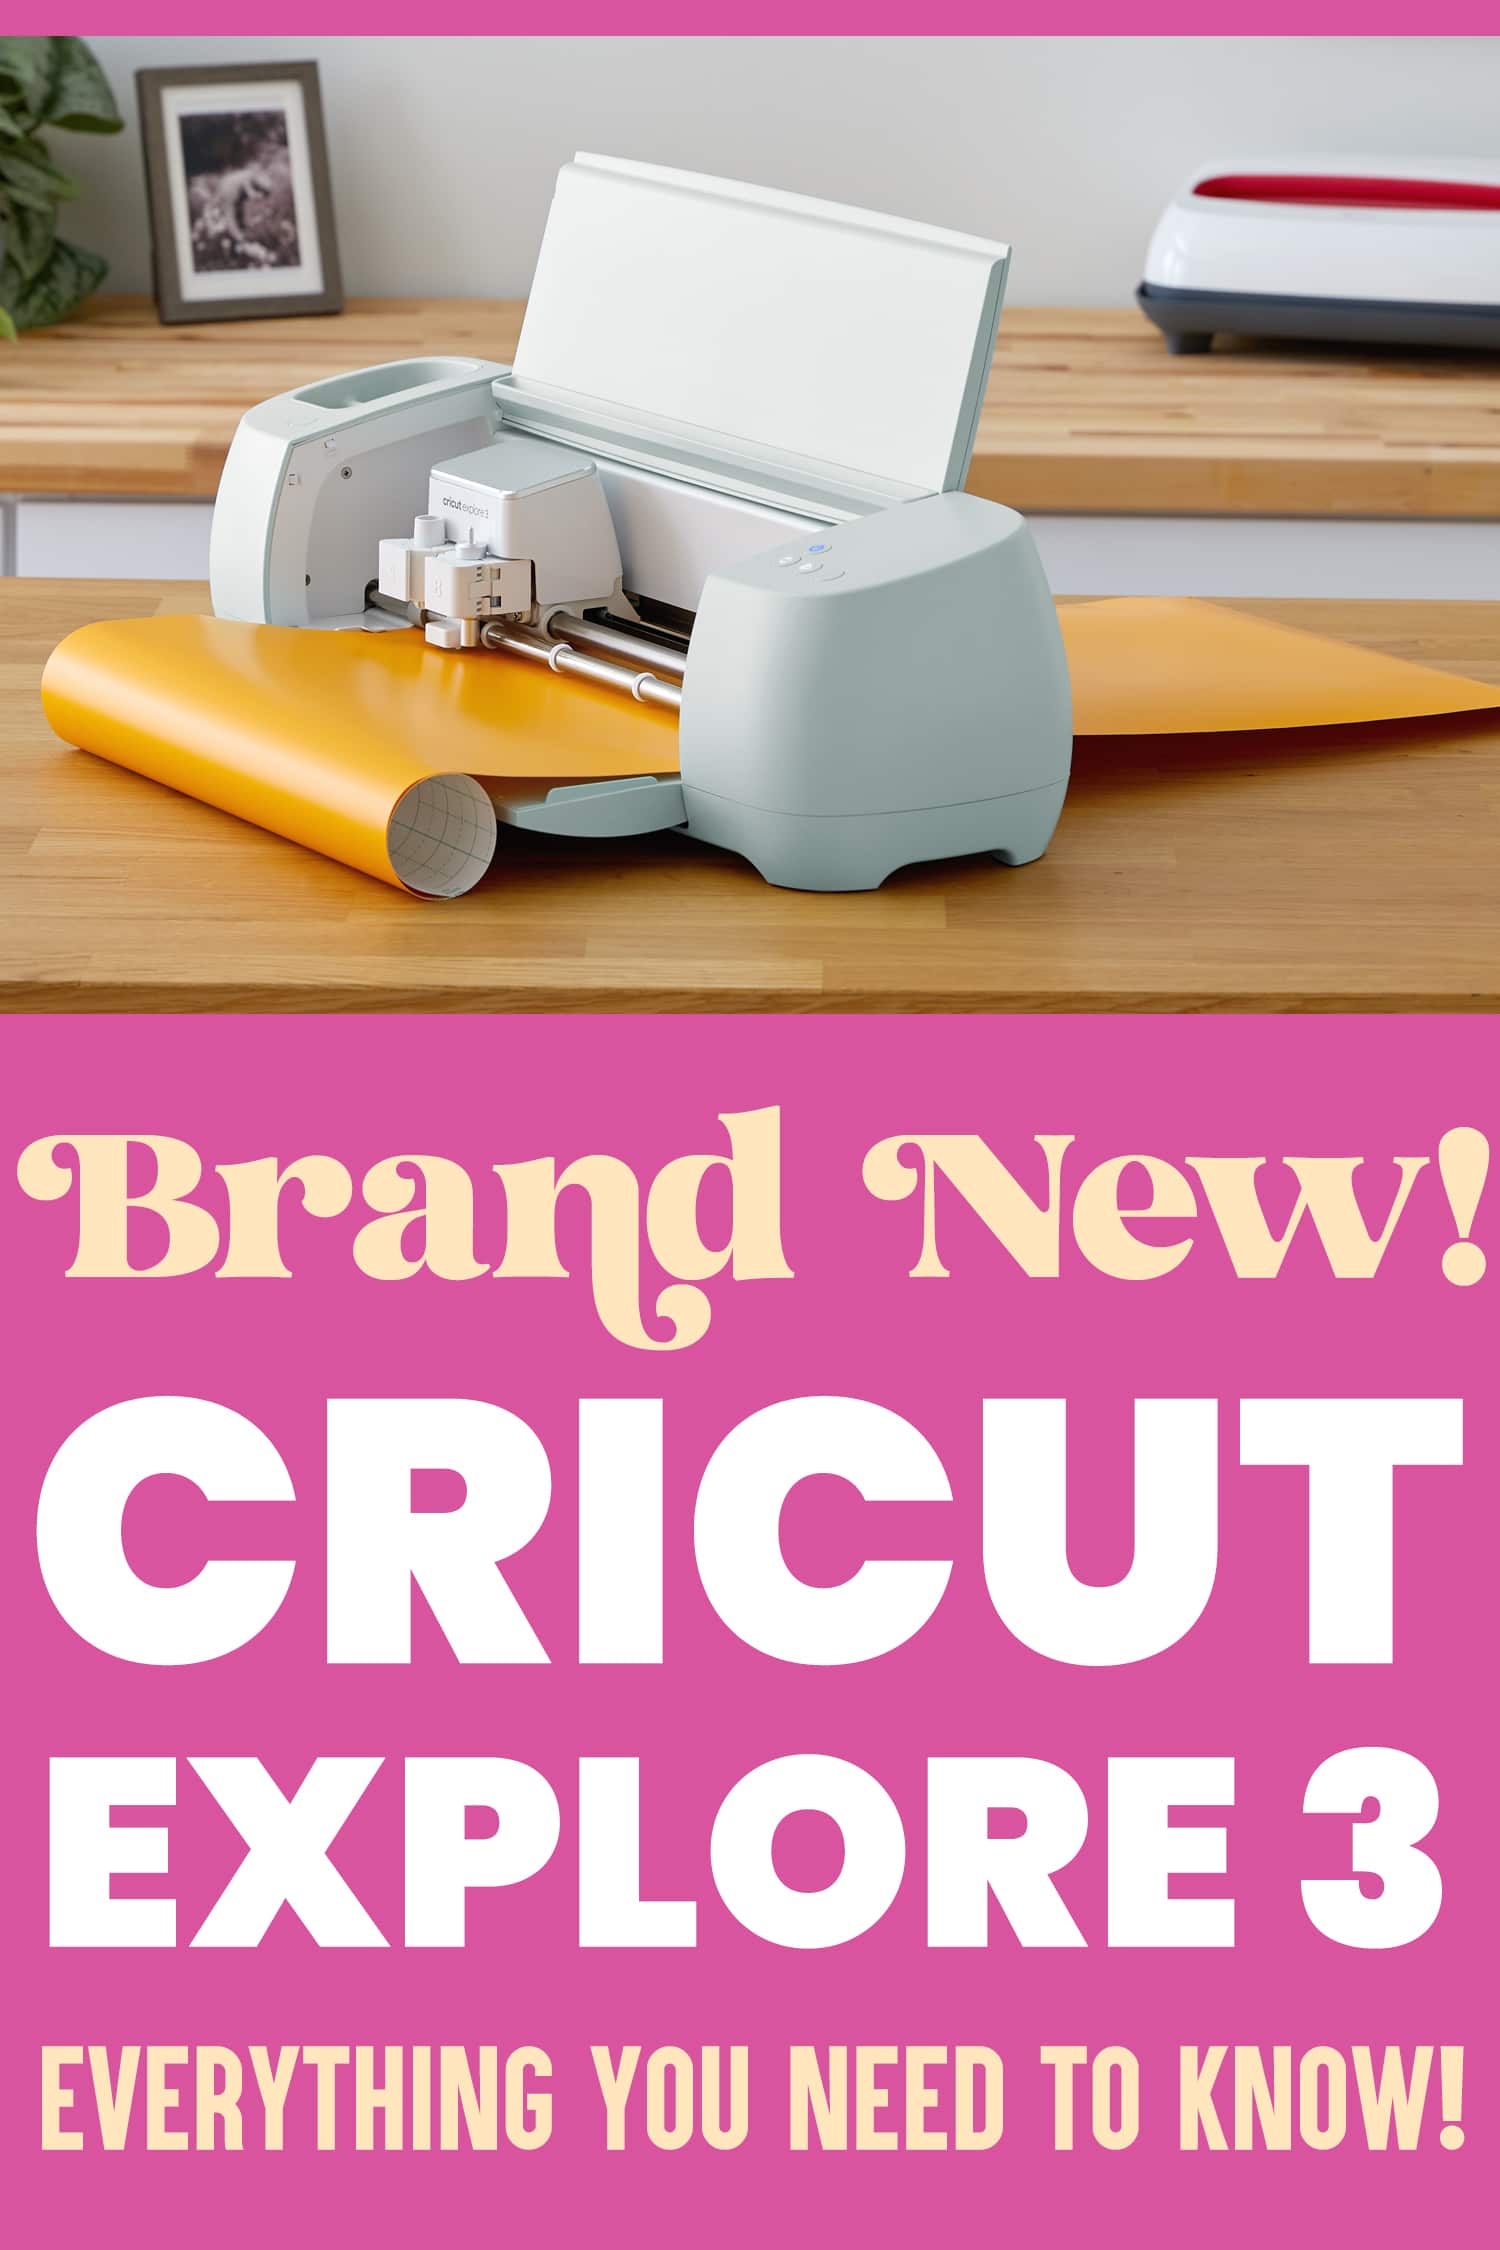 The Cricut Explore 3 and Cricut Maker 3: Everything you need to know